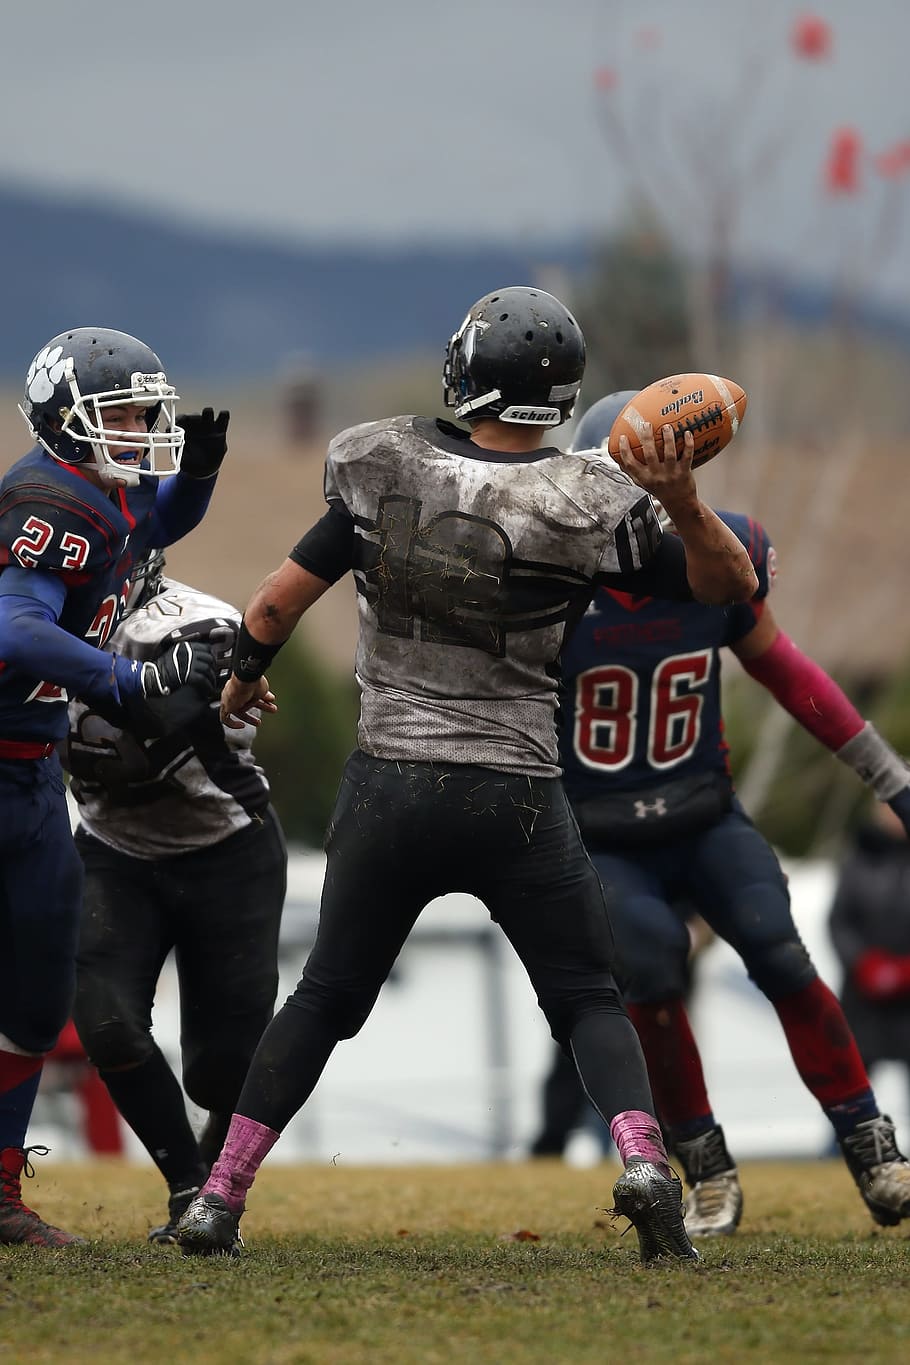 Football, Quarterback, Canada, american football, competition, competitive, action, game, football team, athlete